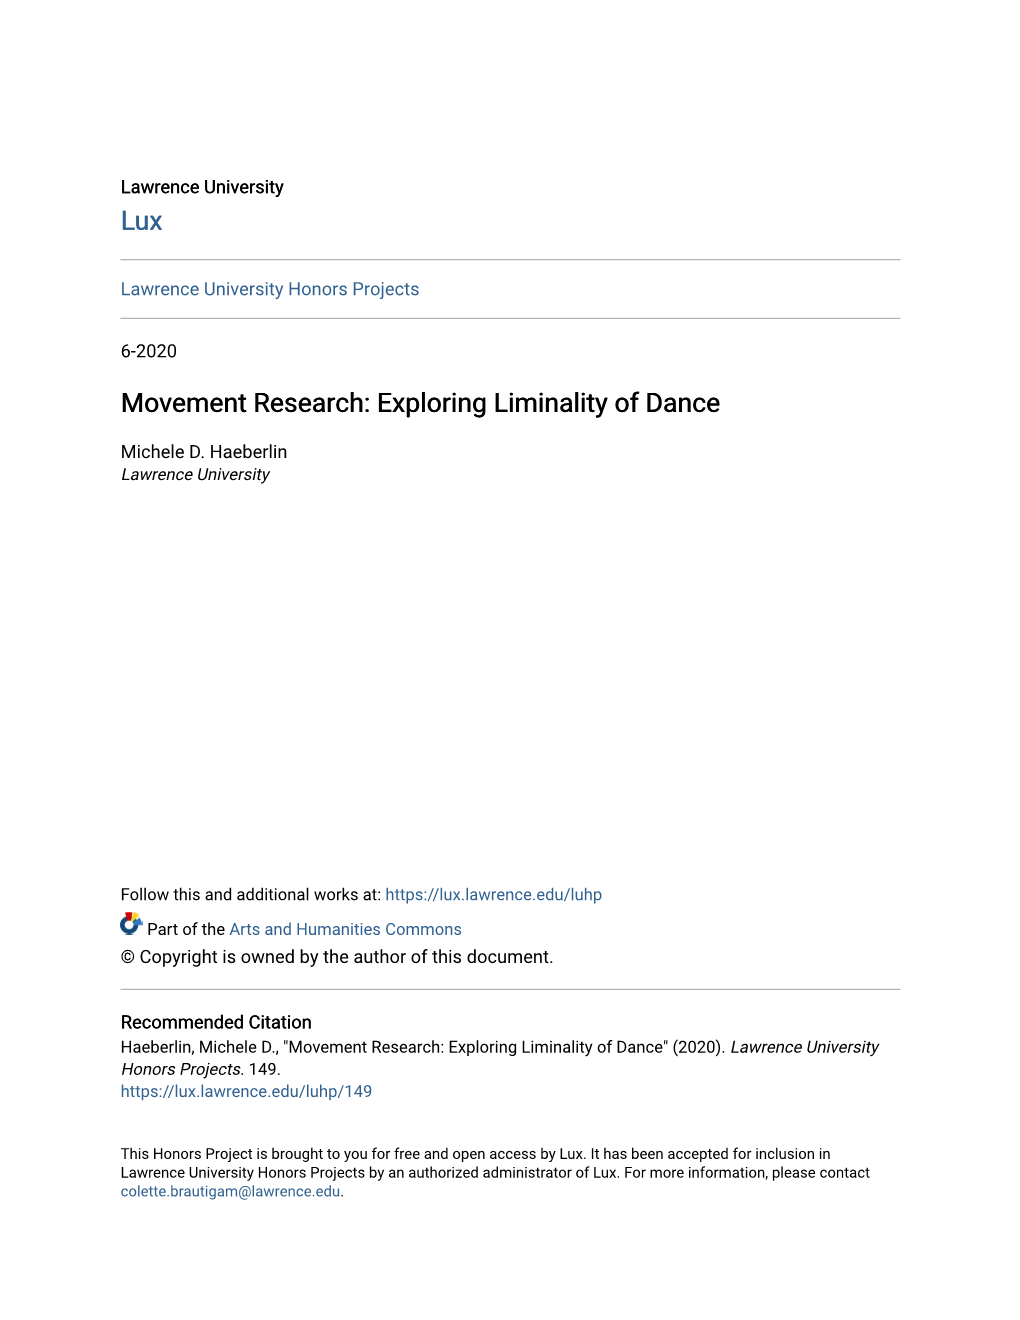 Movement Research: Exploring Liminality of Dance